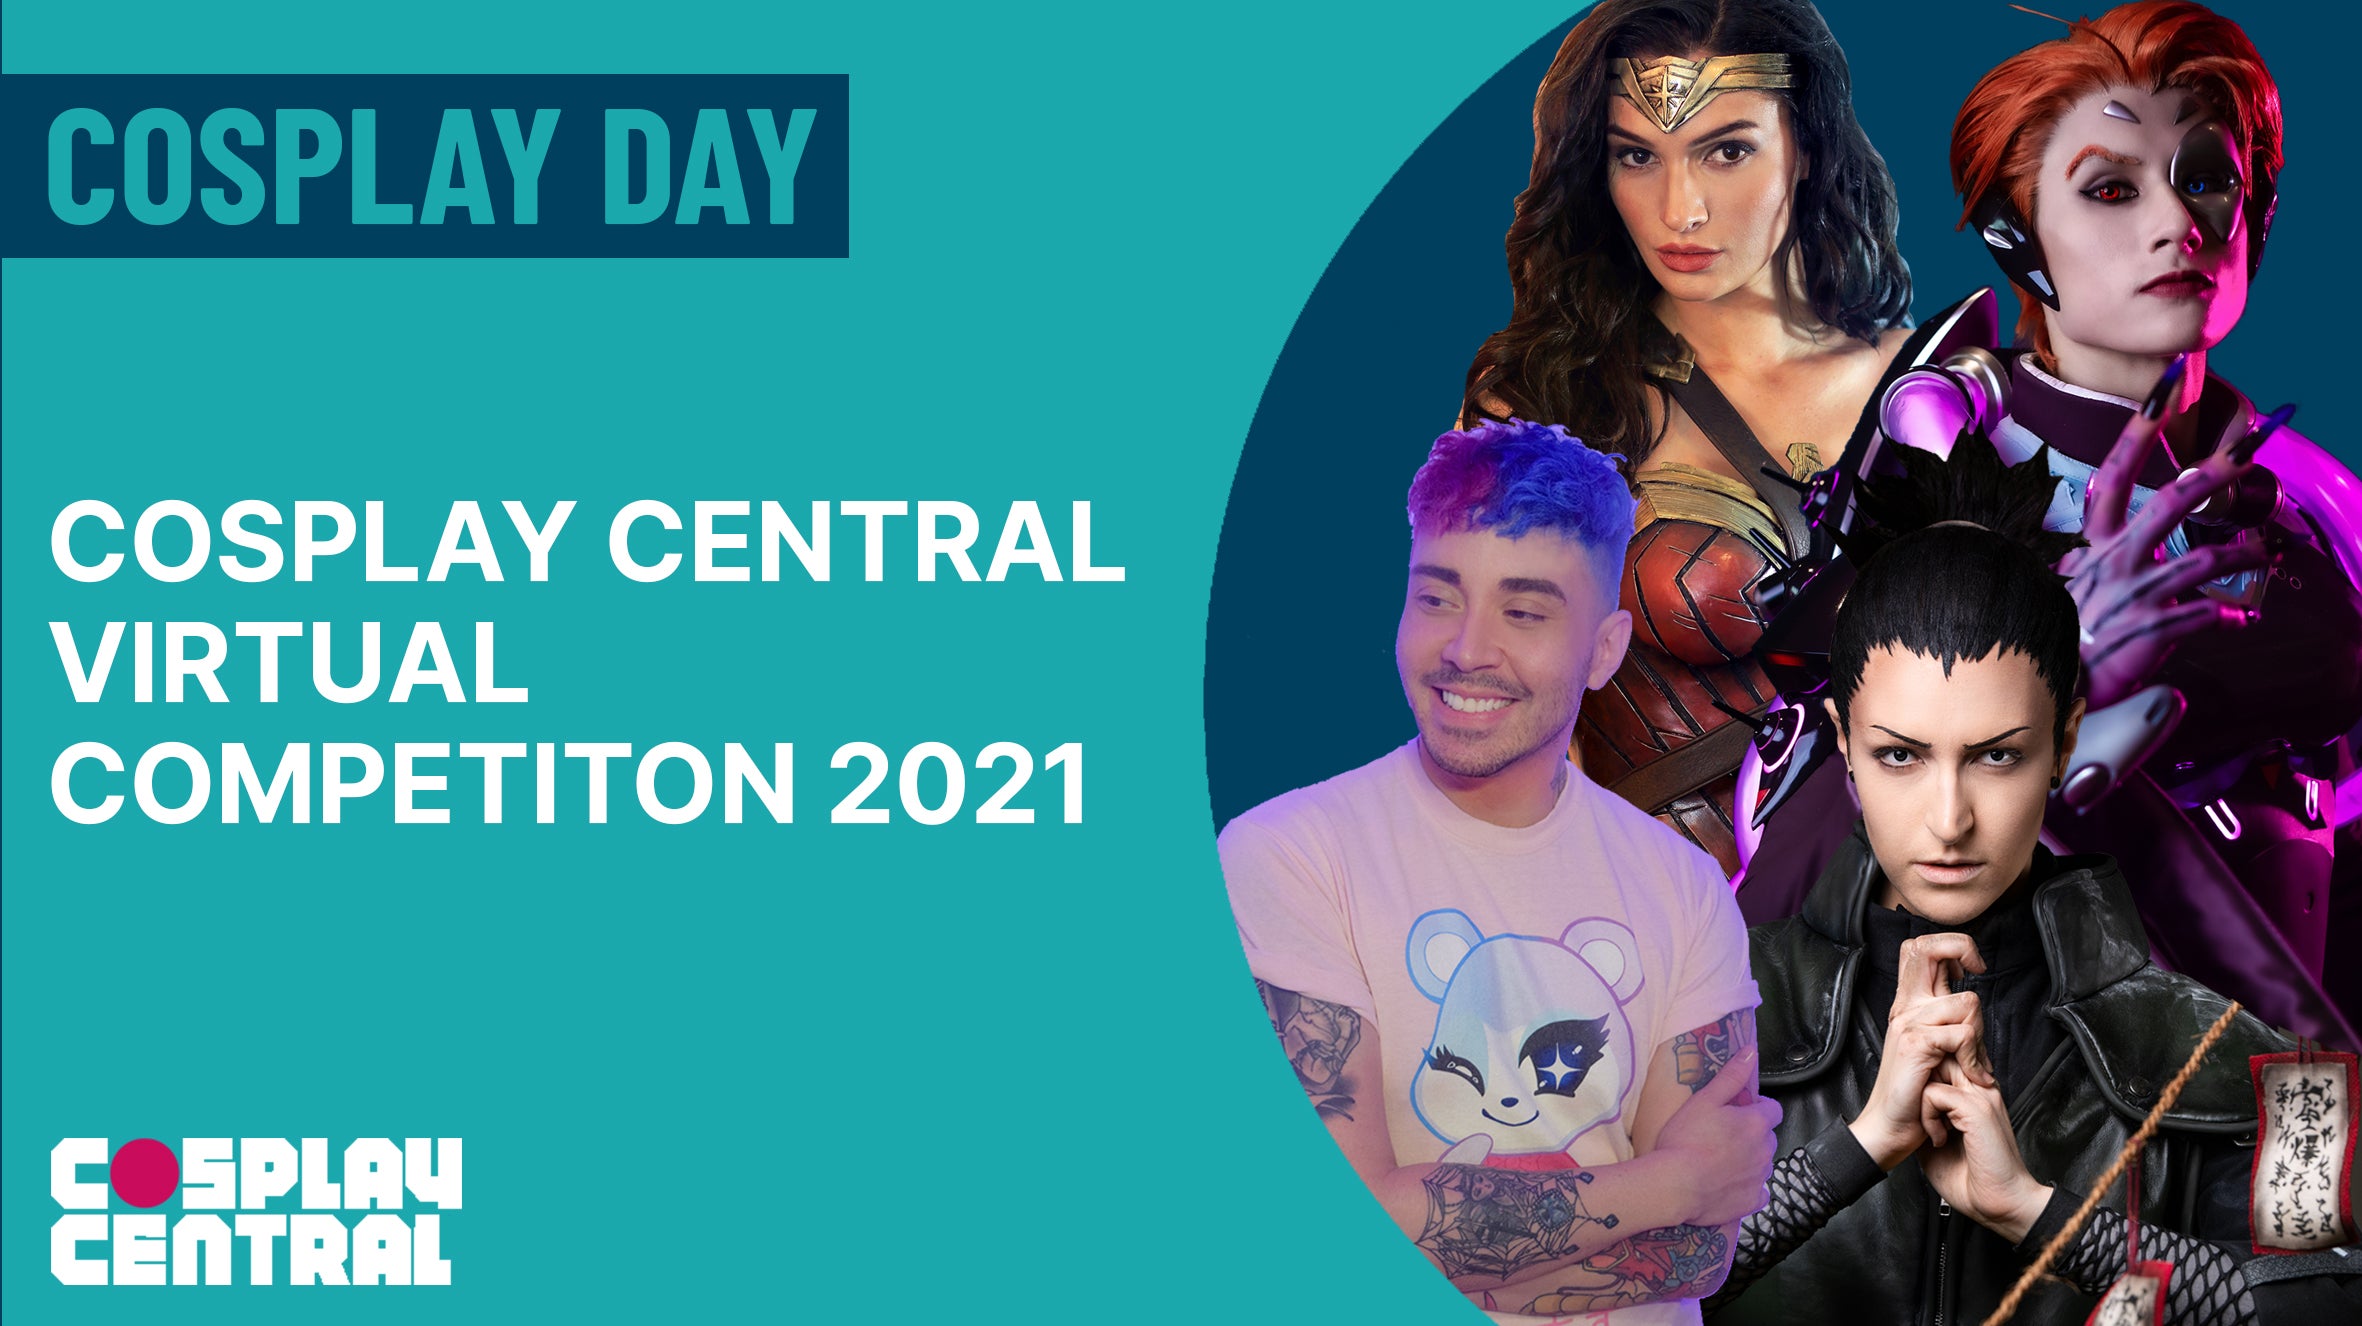 Image for The Cosplay Central Virtual Competition 2021 - Cosplay Day 2021